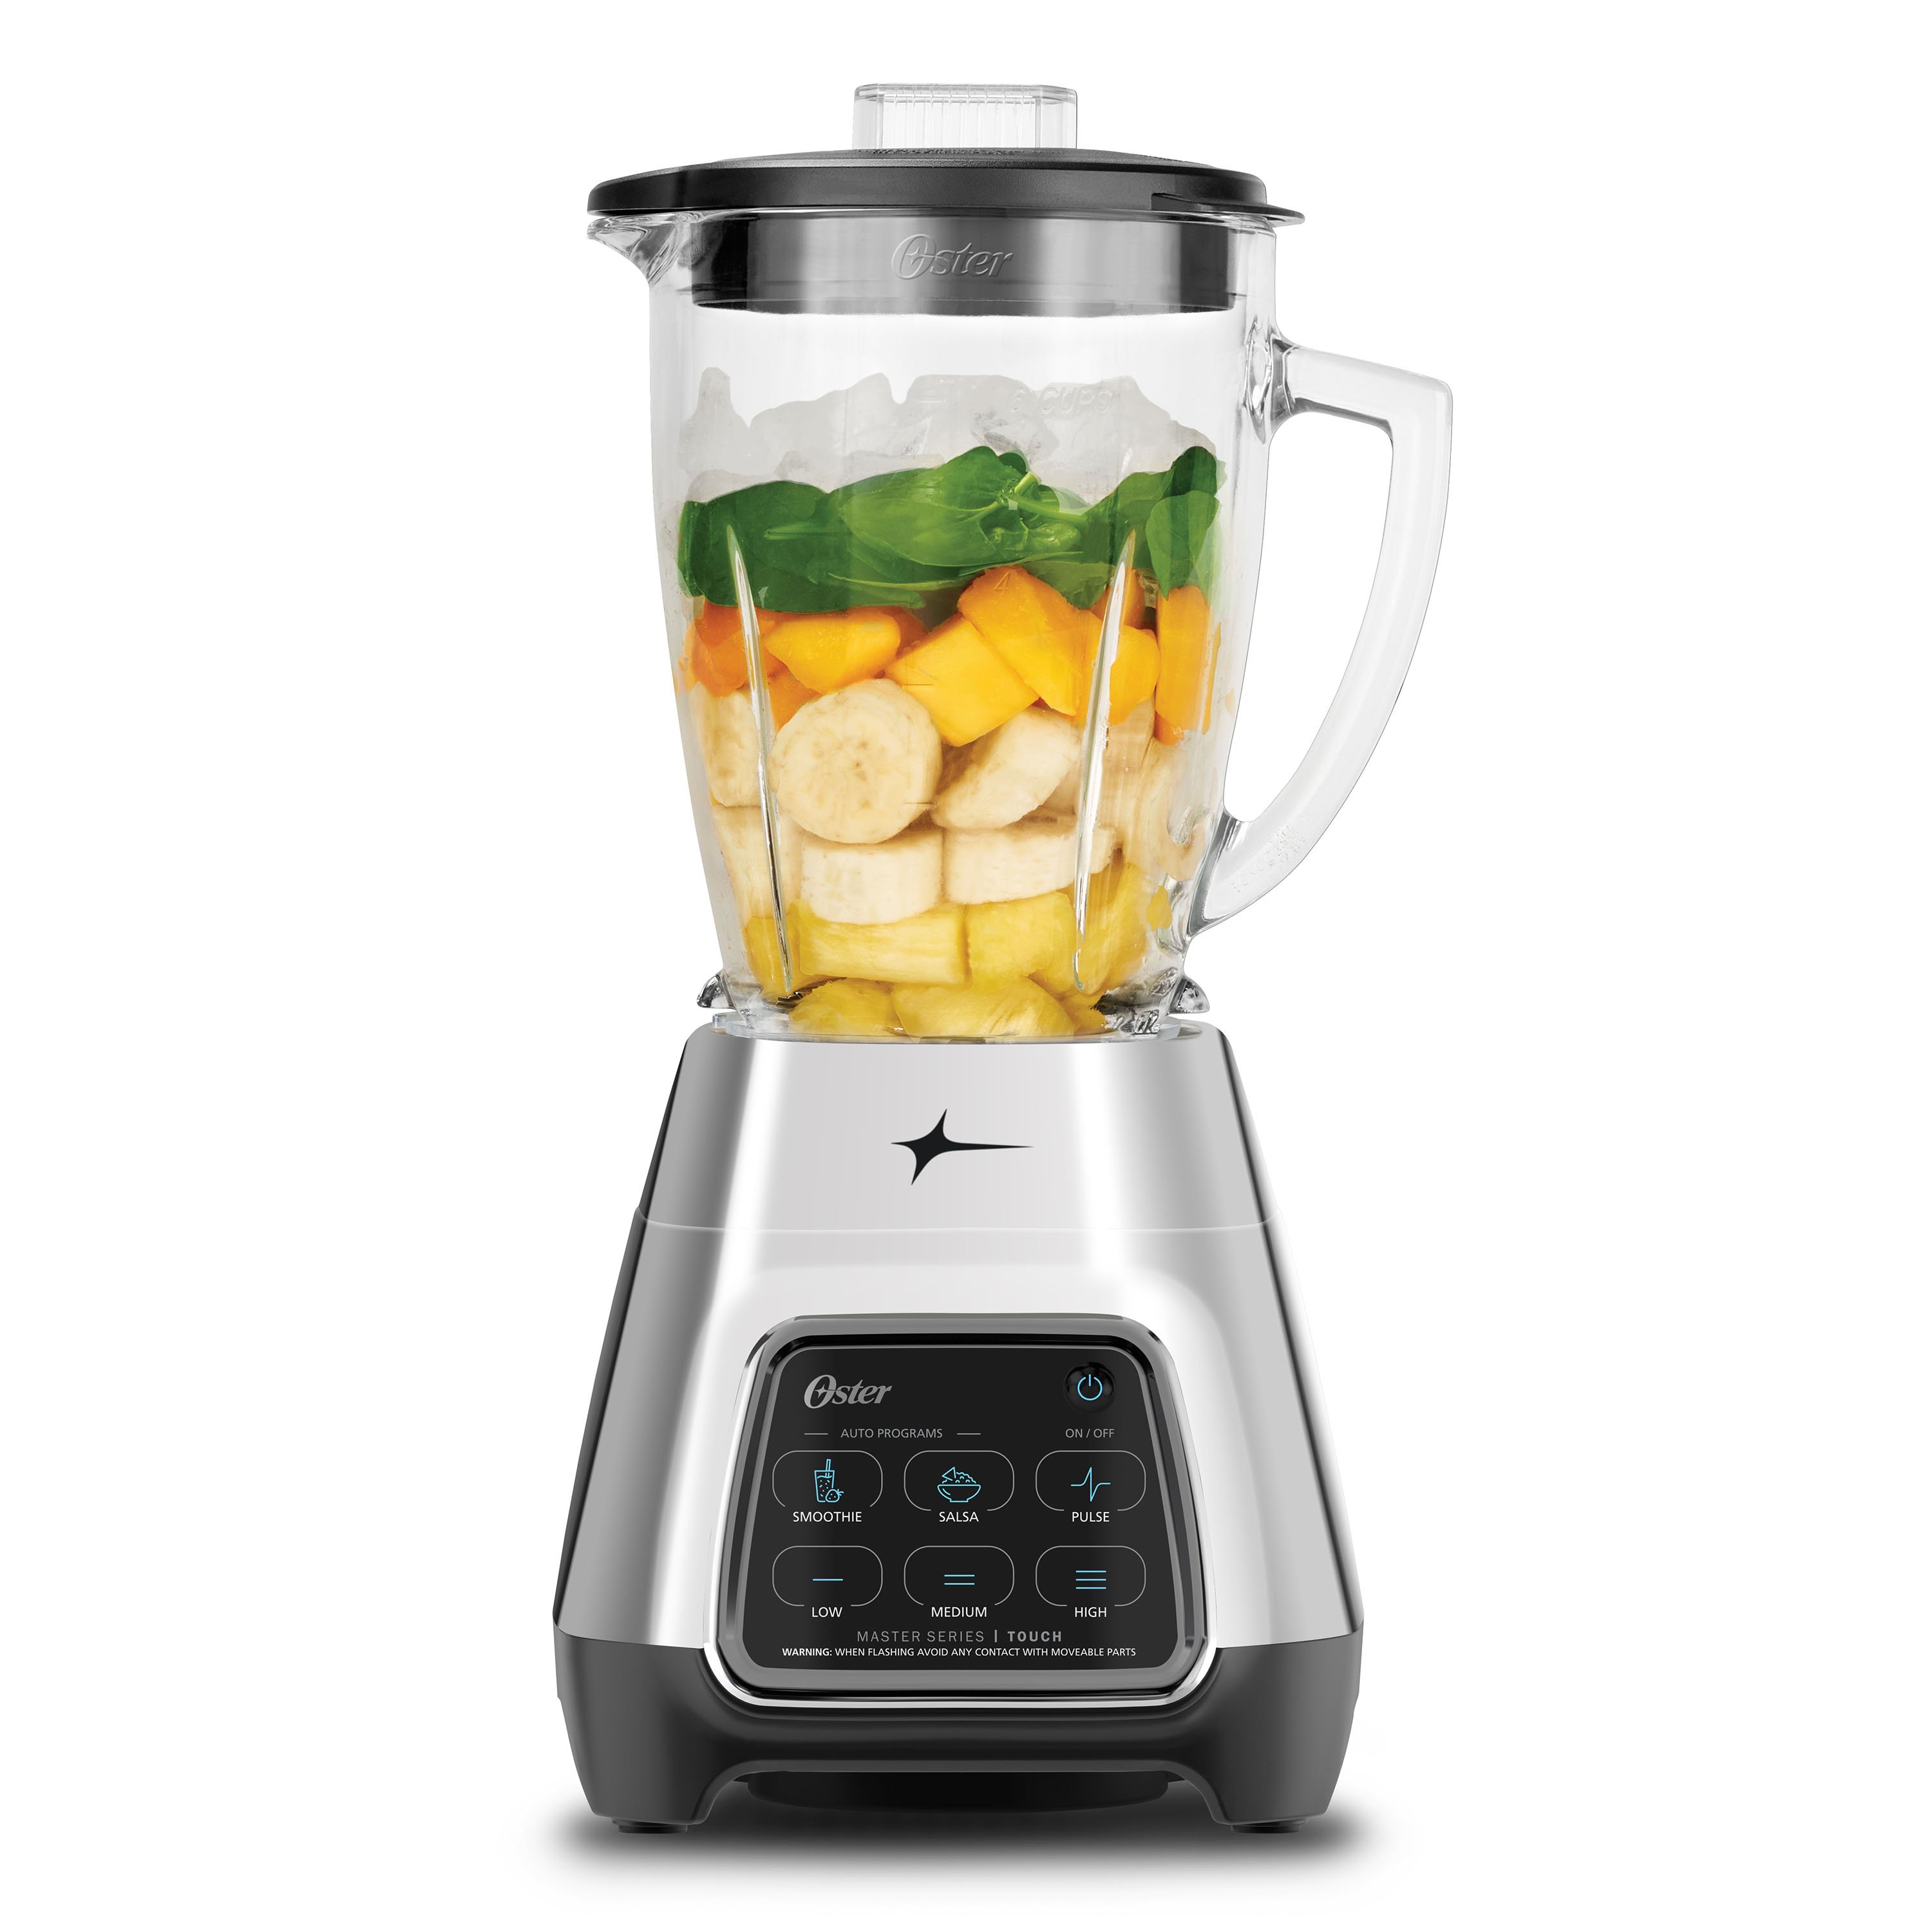 Food processor or blender: How to choose and use two trusty